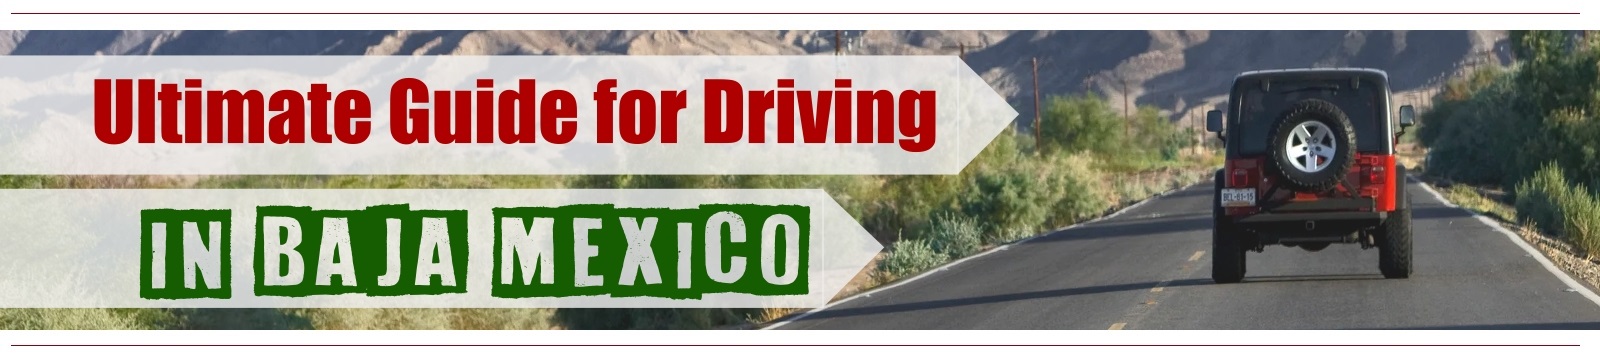 Ultimate Guide for Driving in Baja Mexico